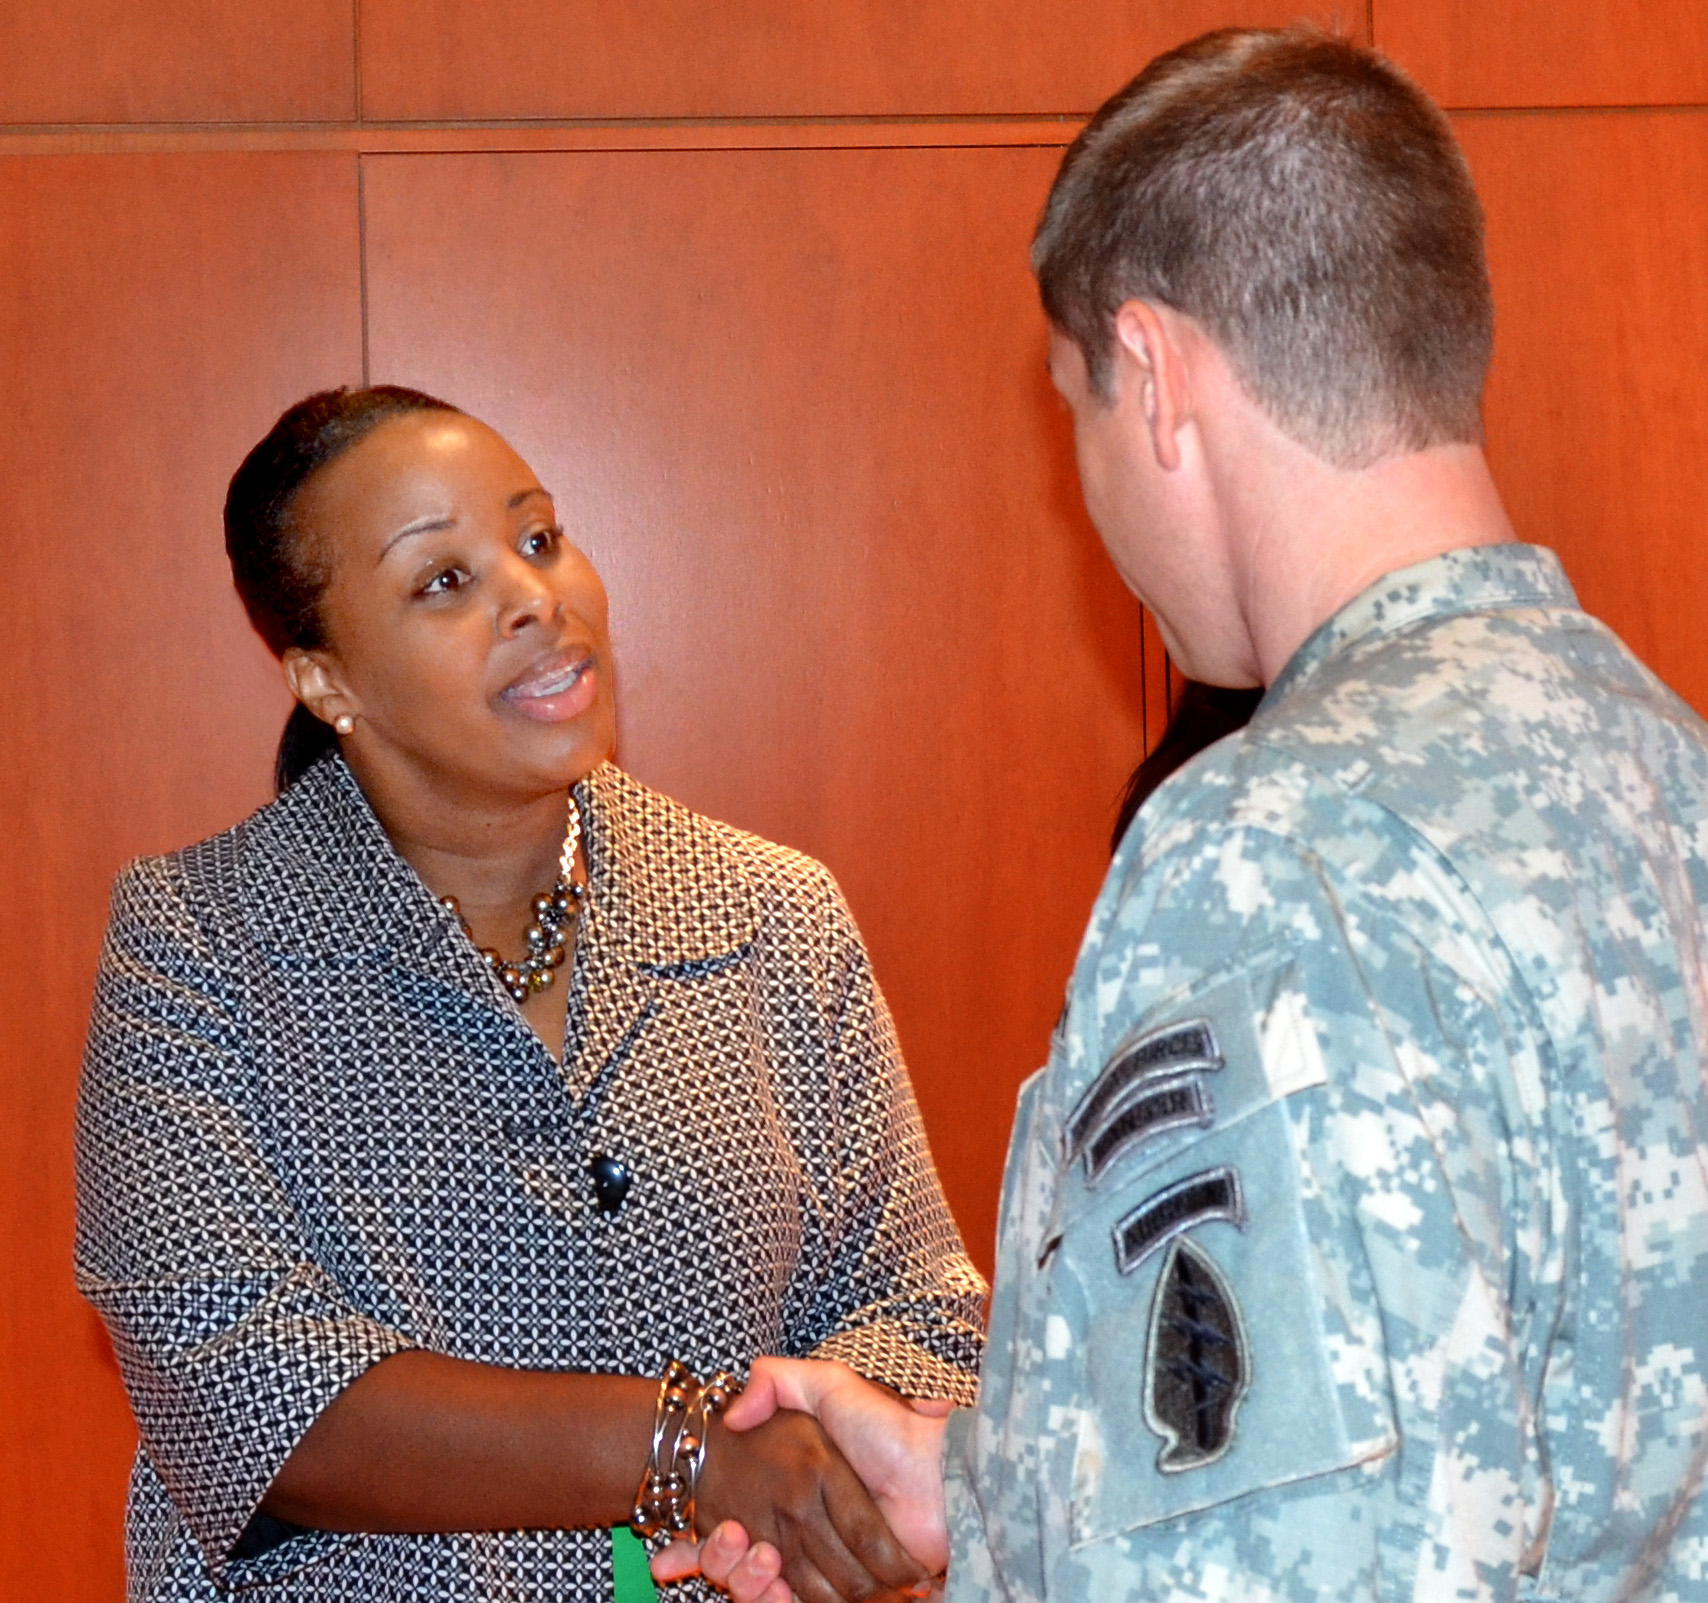 Woman talking to soldier and shaking hands.